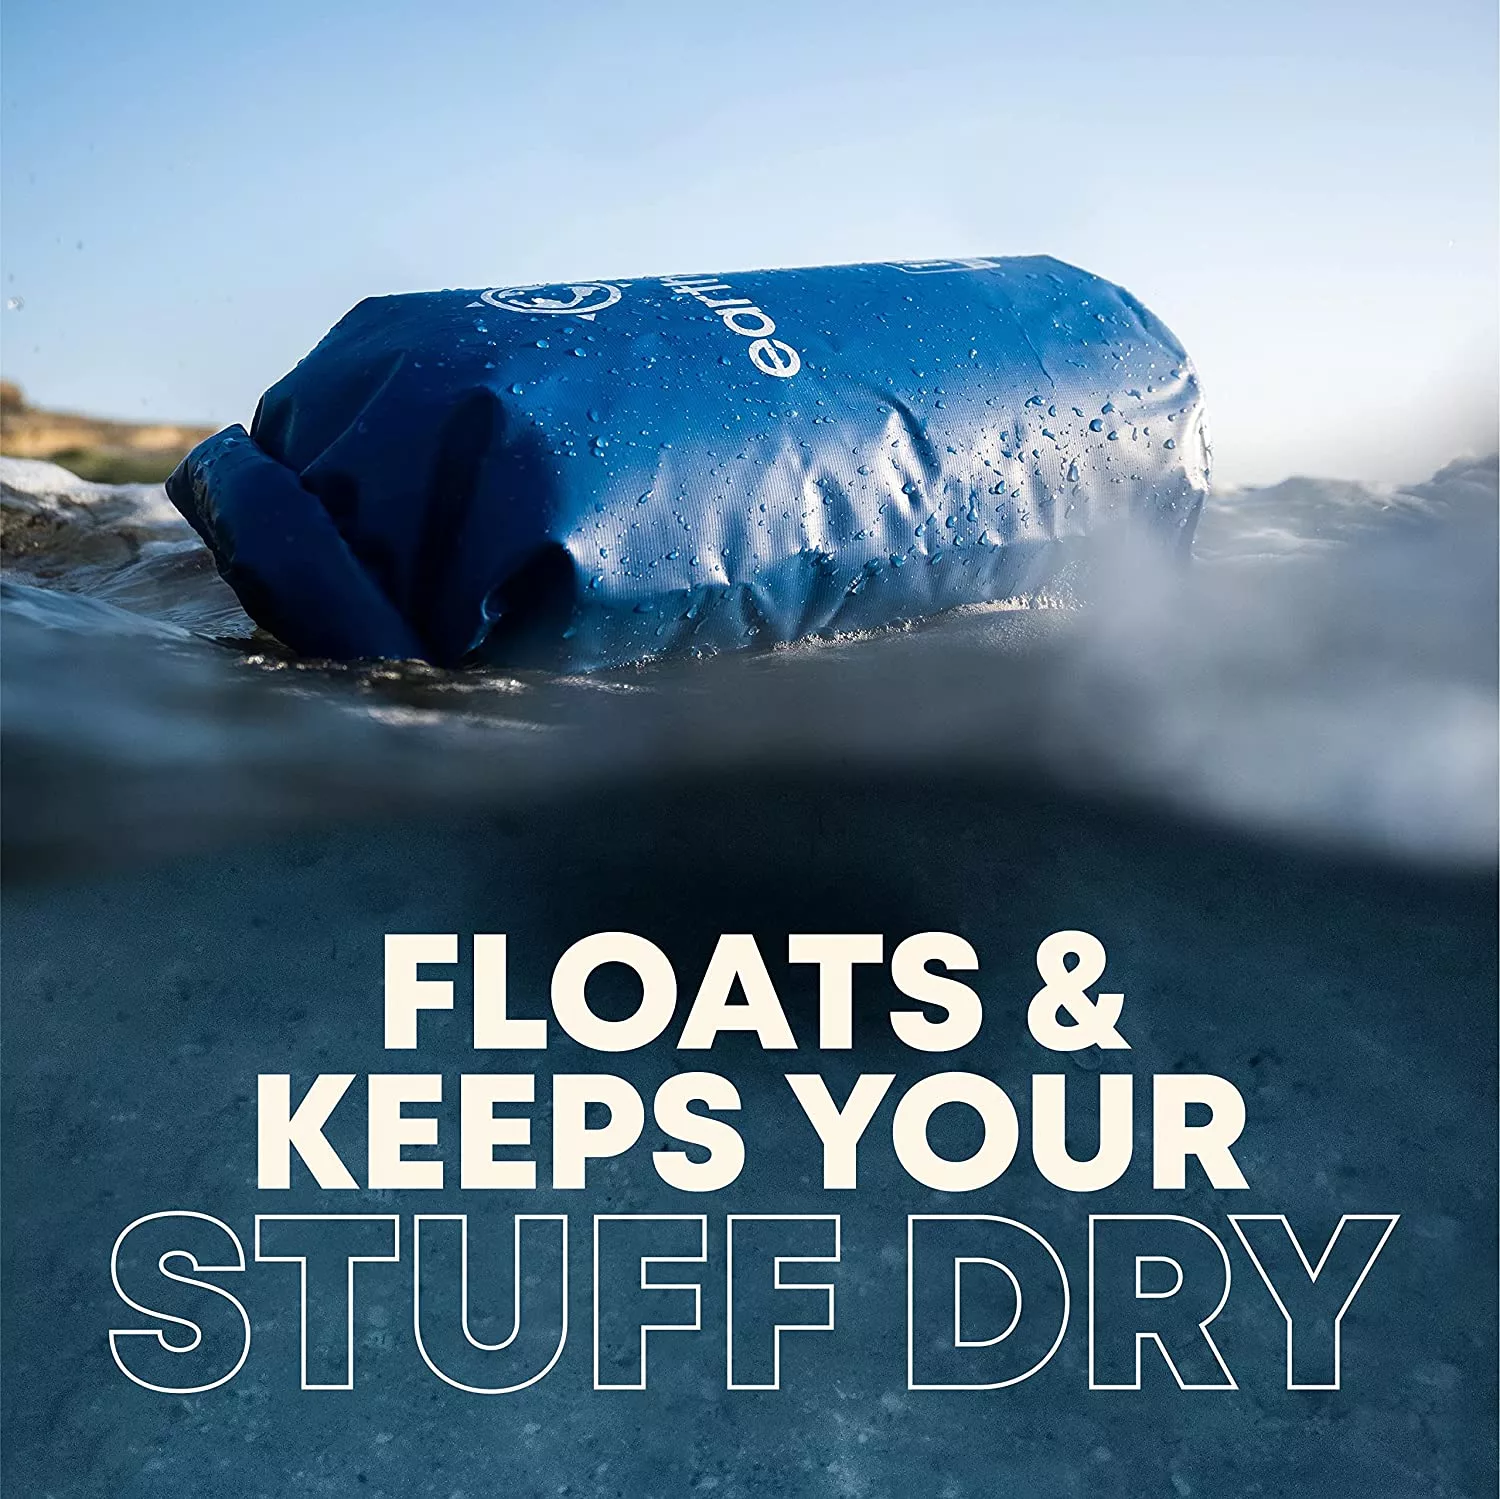 Earth Pak Waterproof Dry Bag floats and keeps your stuff dry